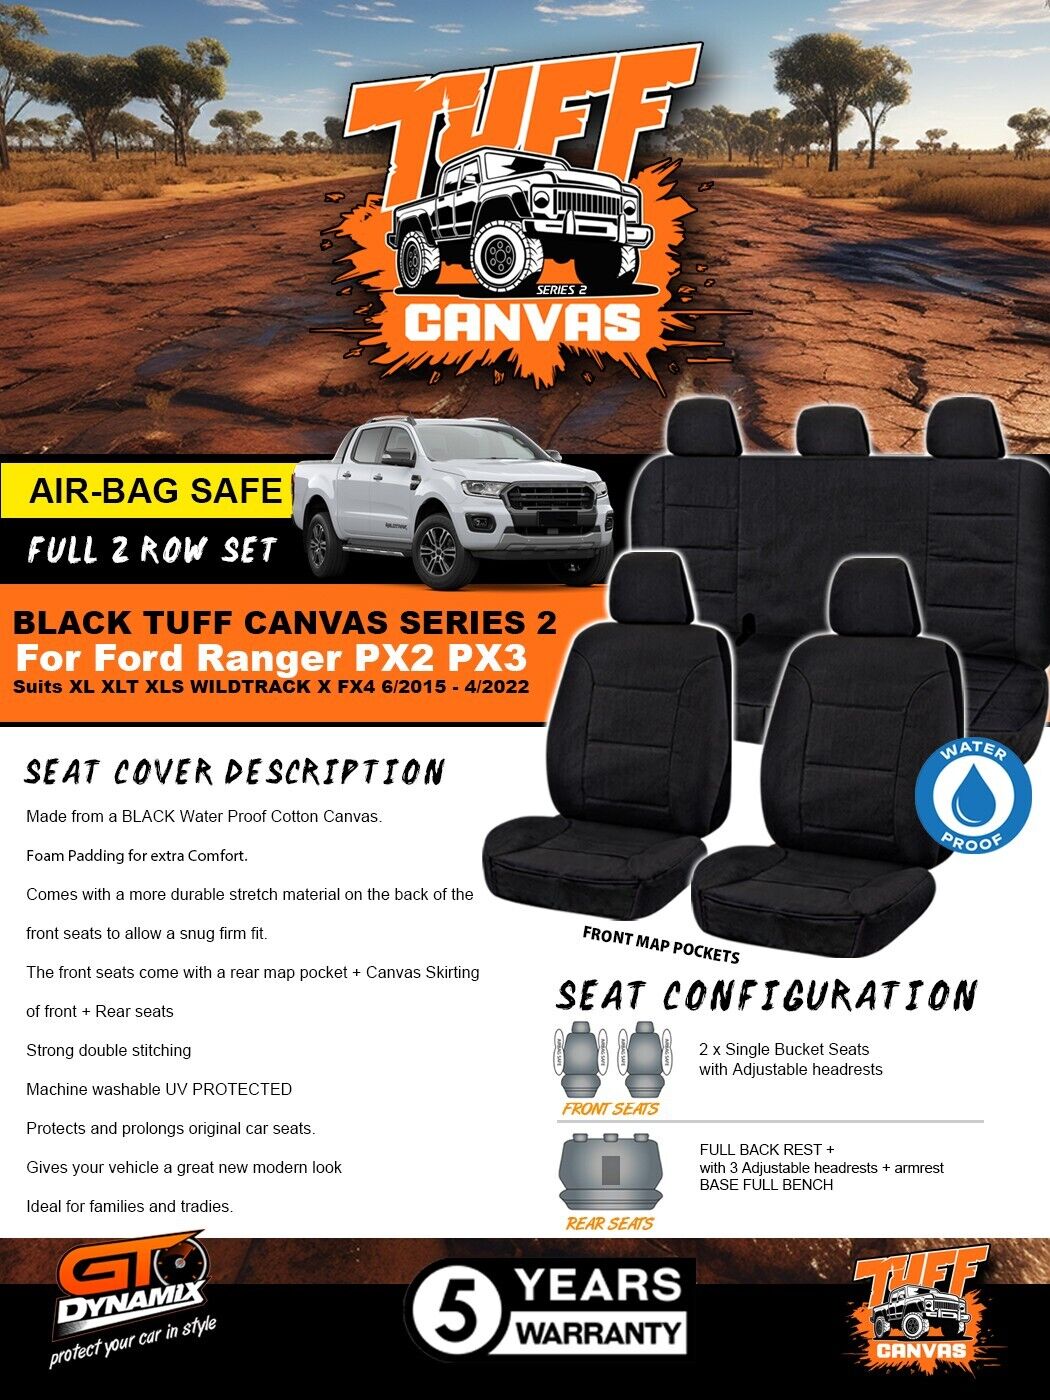 Black Tuff Canvas S2 Seat Covers 2 Rows For Ford Ranger PX2 PX3 XL XLT SPORT WILDTRACK 6/2015-4/2022